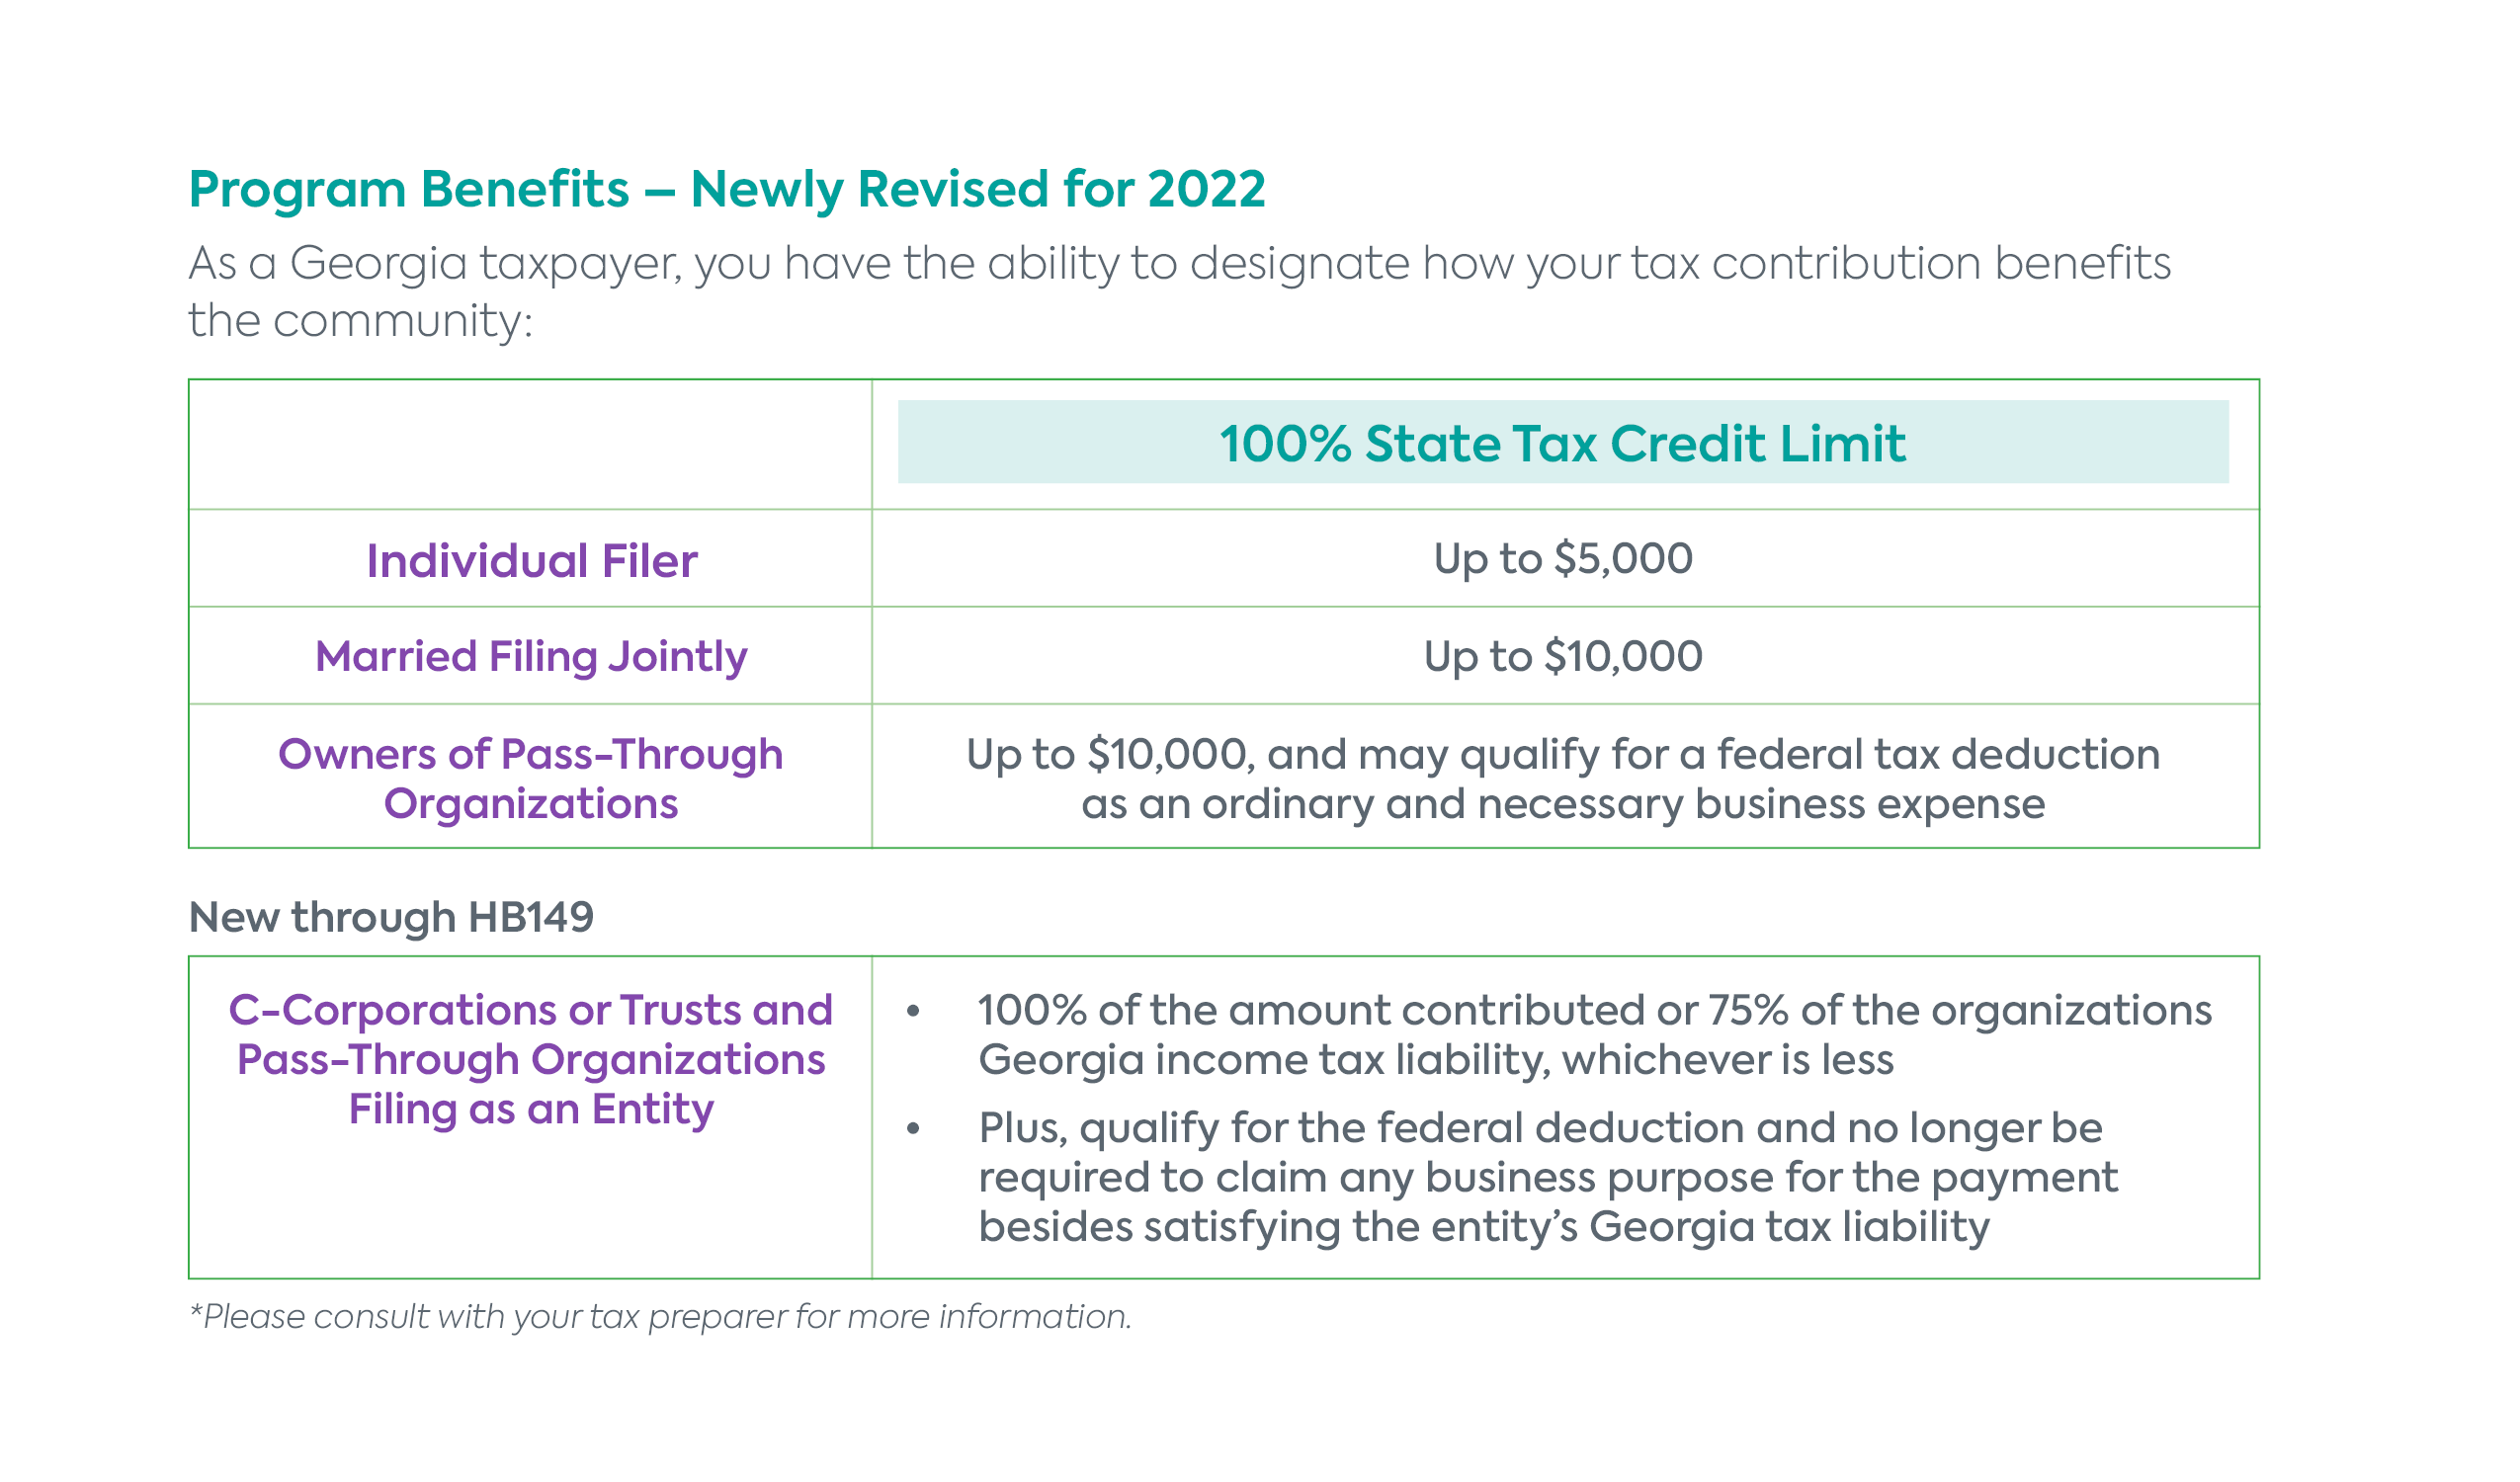 100% state tax credit limits: up to $5,000 for an individual filer, up to $10,000 for married and filing jointly, for owners of pass-through organizations up to $10,000 and may qualify for a federal tax deduction as an ordinary and necessary business expense. New through HB 149: C-Corporations or Trusts and Pass-Through Organizations Filing as an Entity- 100% of the amount contributed or 75% of the organizations Georgia income tax liability, whichever is less. Plus, qualify for the federal deduction and no longer be required to claim any business purpose for the payment besides satisfying the entity’s Georgia tax liability.